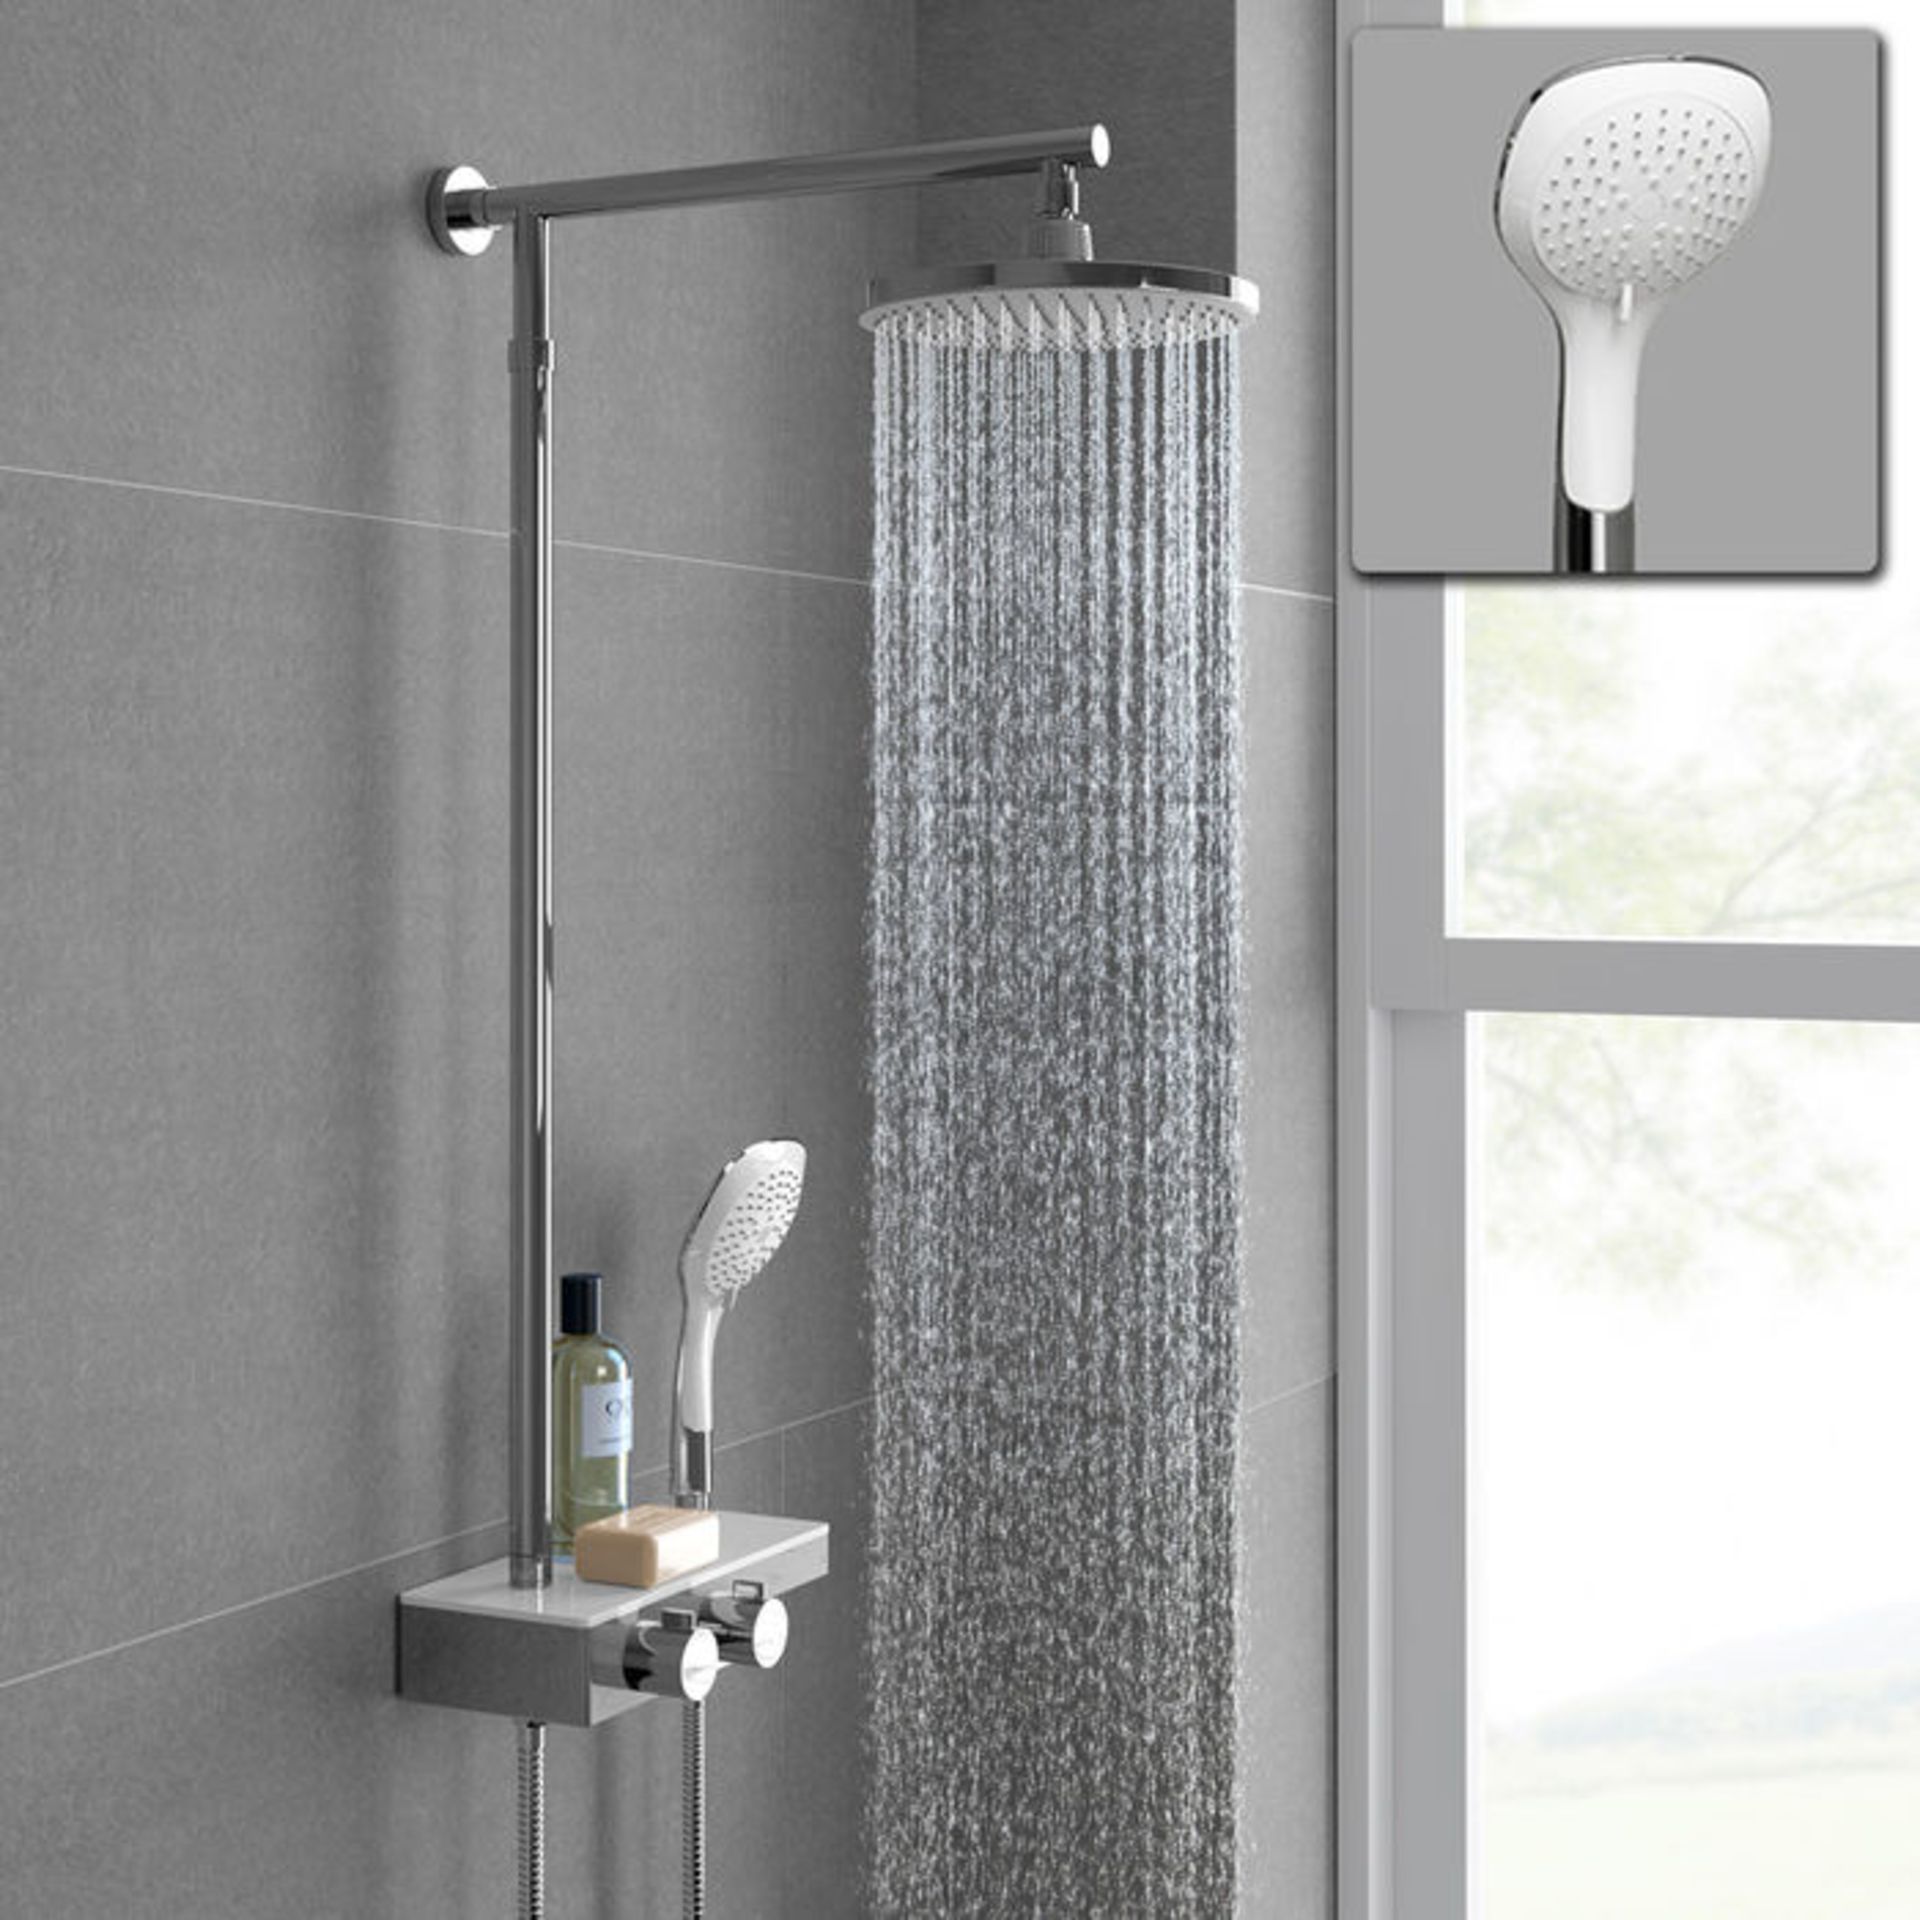 (CP124) Round Exposed Thermostatic Mixer Shower Kit Medium Head & Shelf. Cool to touch shower f... - Image 4 of 4